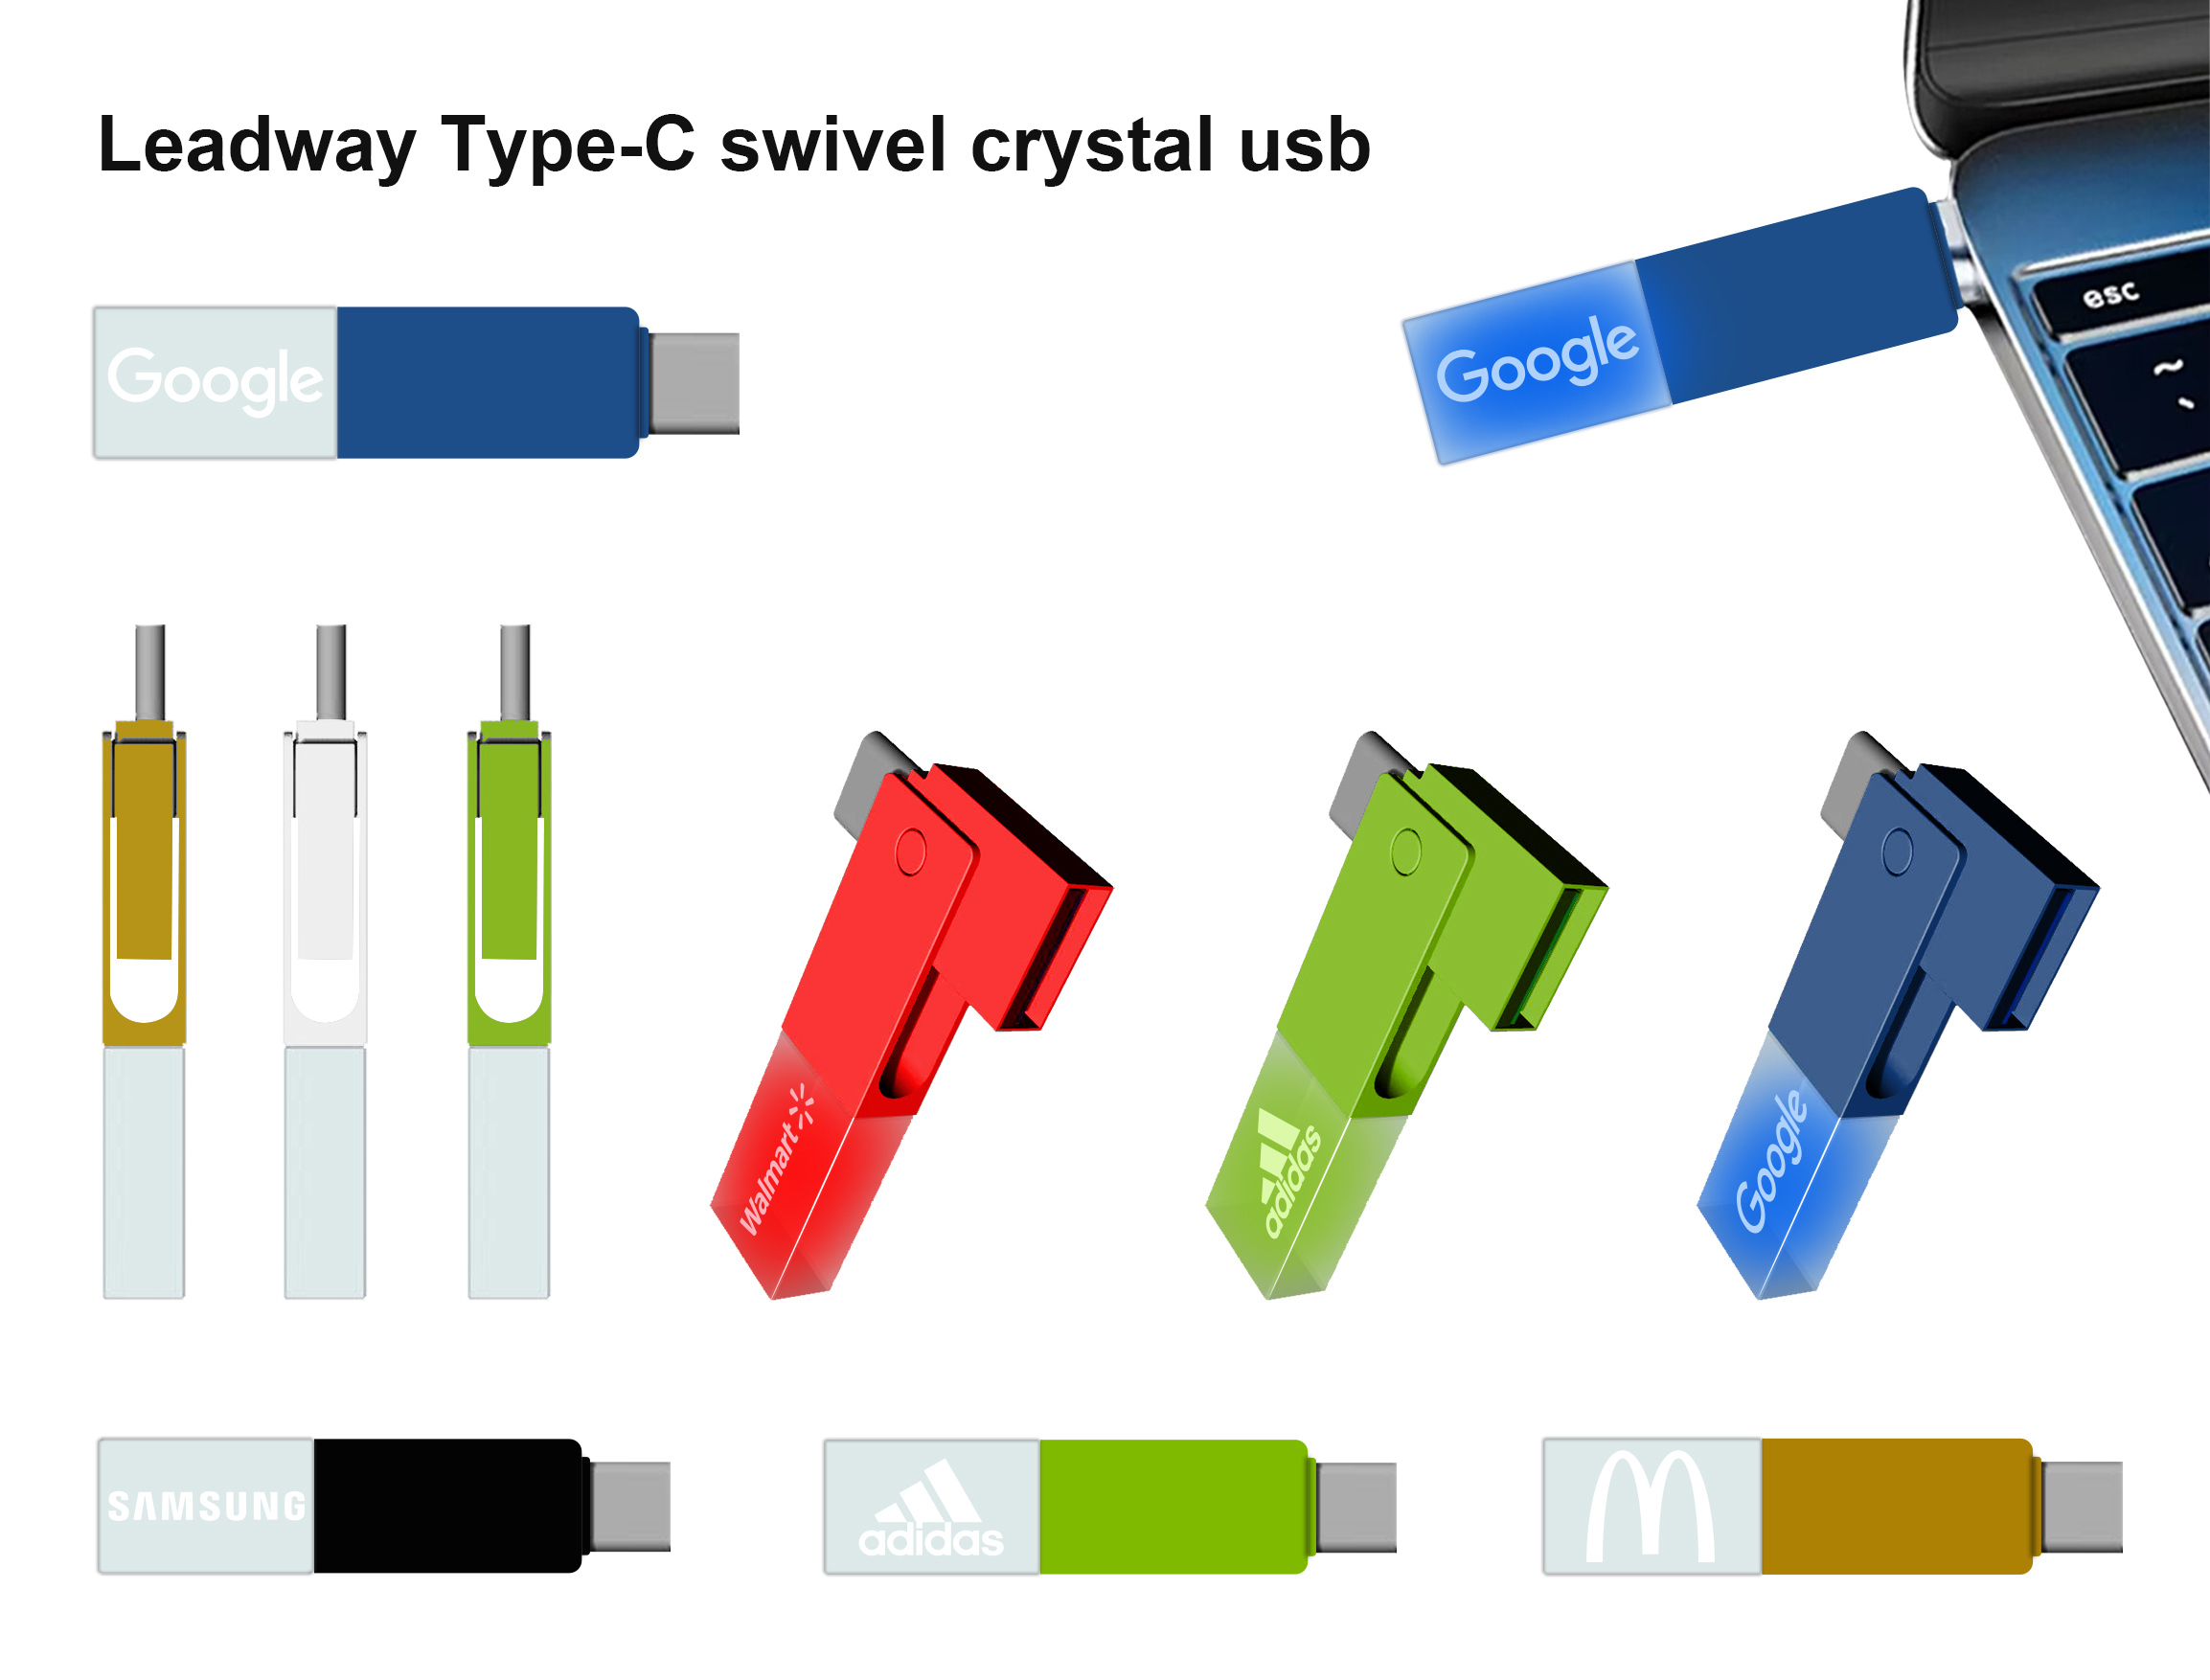 New Arrival: Swivel Crystal Type-C with USB 2in1 USB Drive